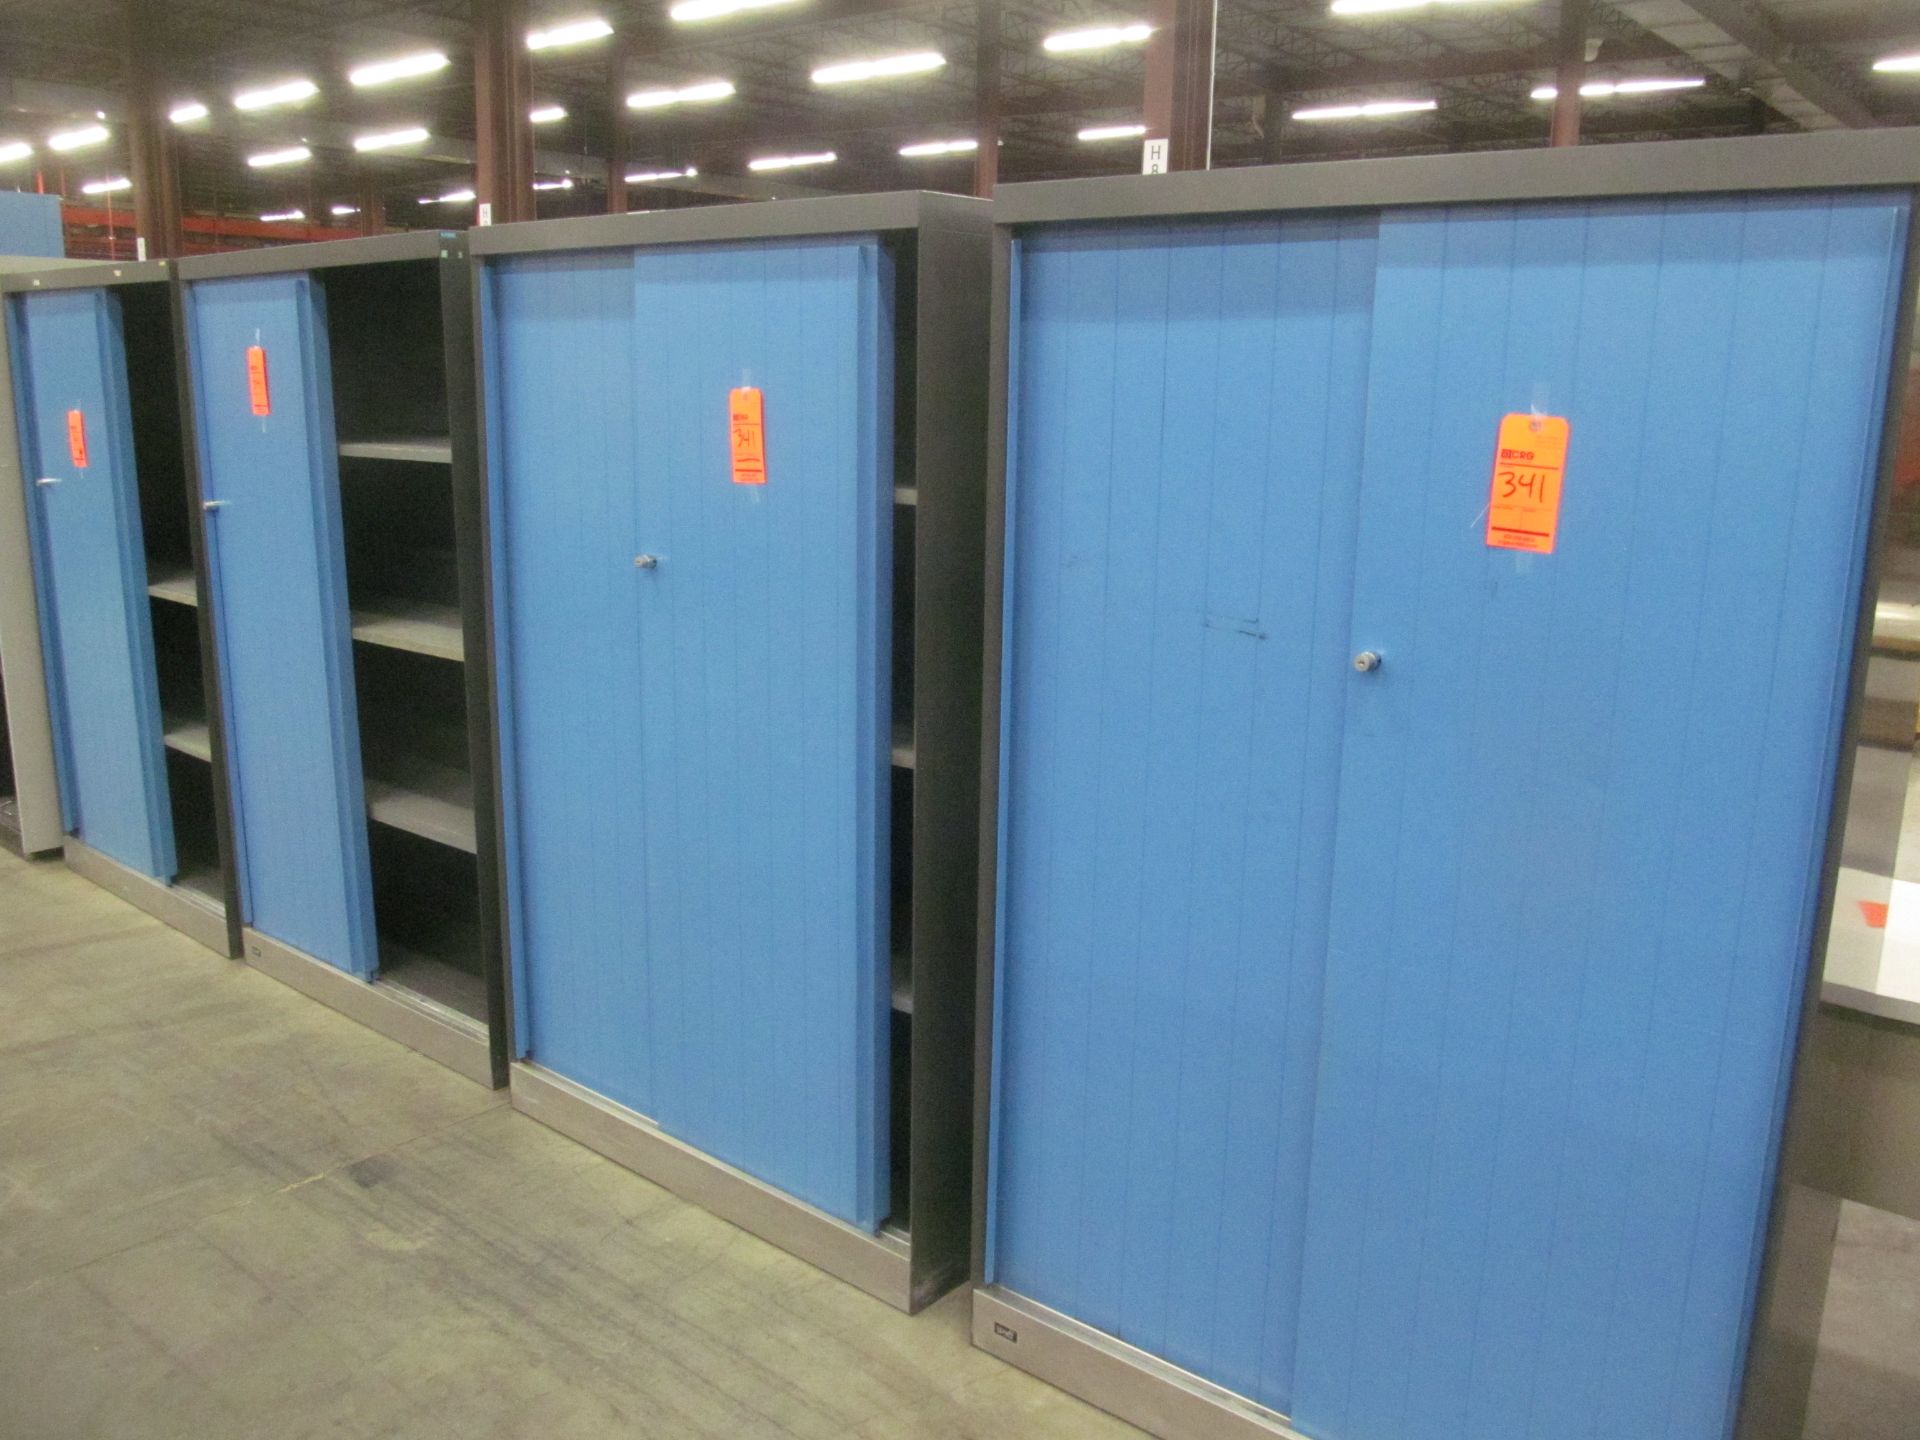 Lot of (4) metal storage cabinets, with dual sliding doors, 44" x 16" x 70" - Image 2 of 2